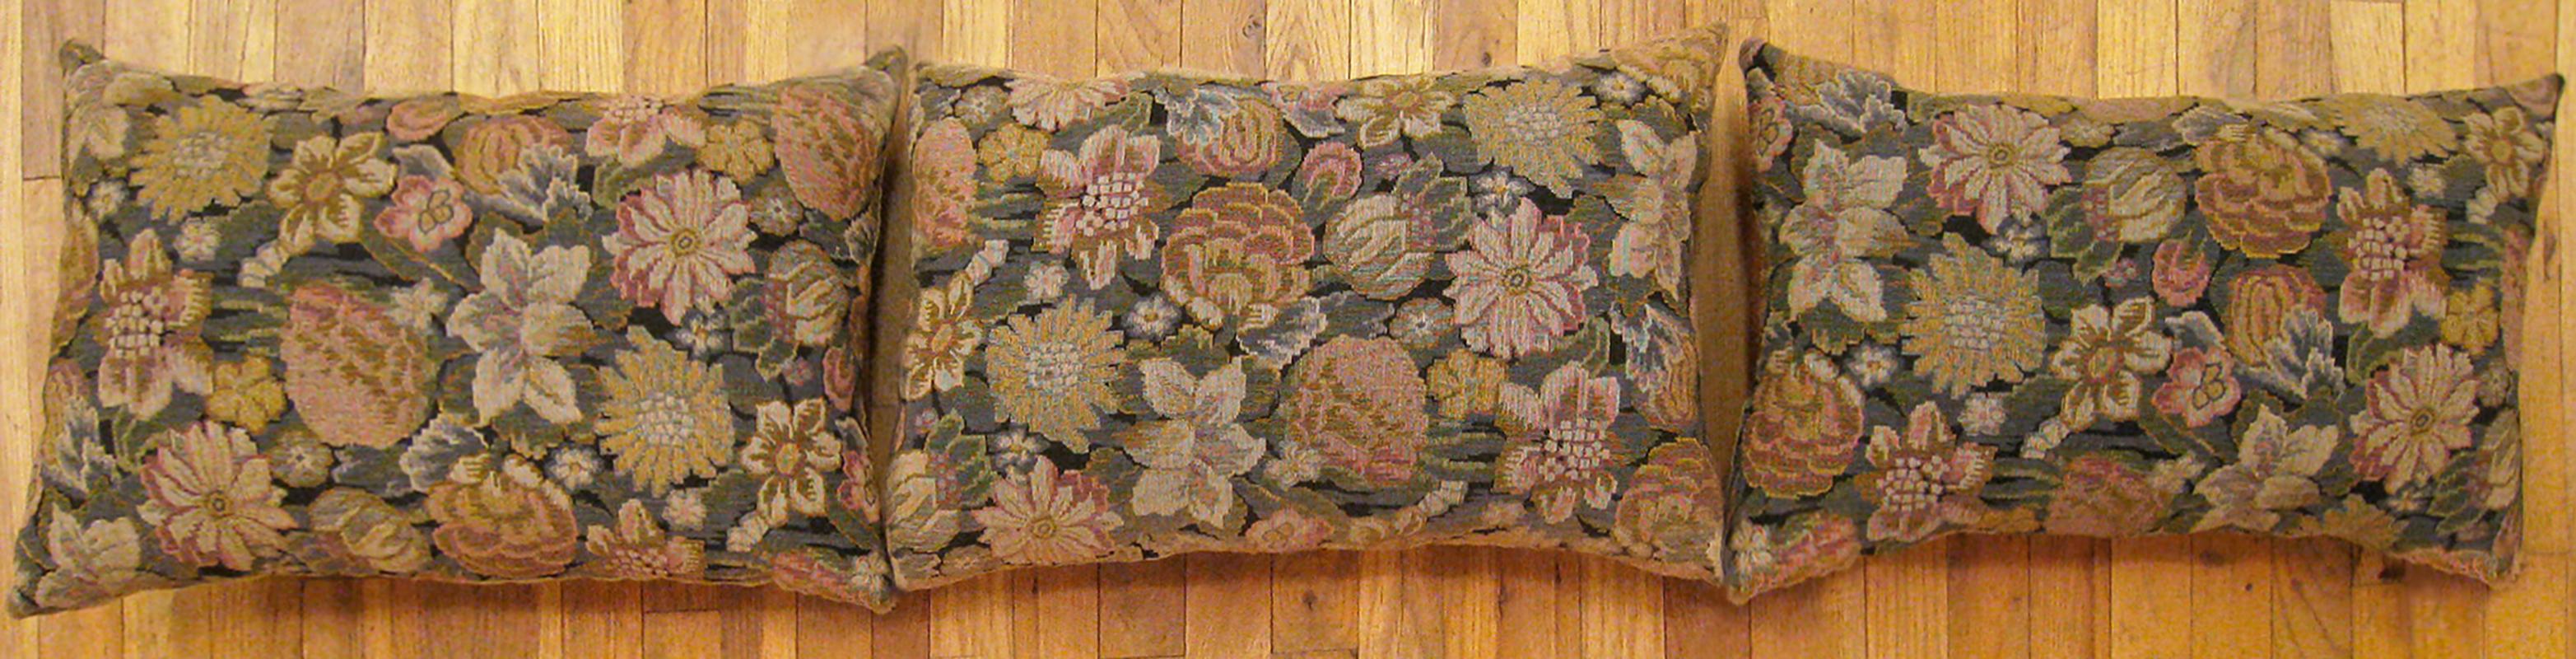 A set of antique Jacquard Tapestry pillows ; size 24” x 16” (2’ 0” x 1’ 4”) each.

An antique decorative pillows with floral elments allover a green central field, size 24” x 16” (2’ 0” x 1’ 4”) each. This lovely decorative pillow features an